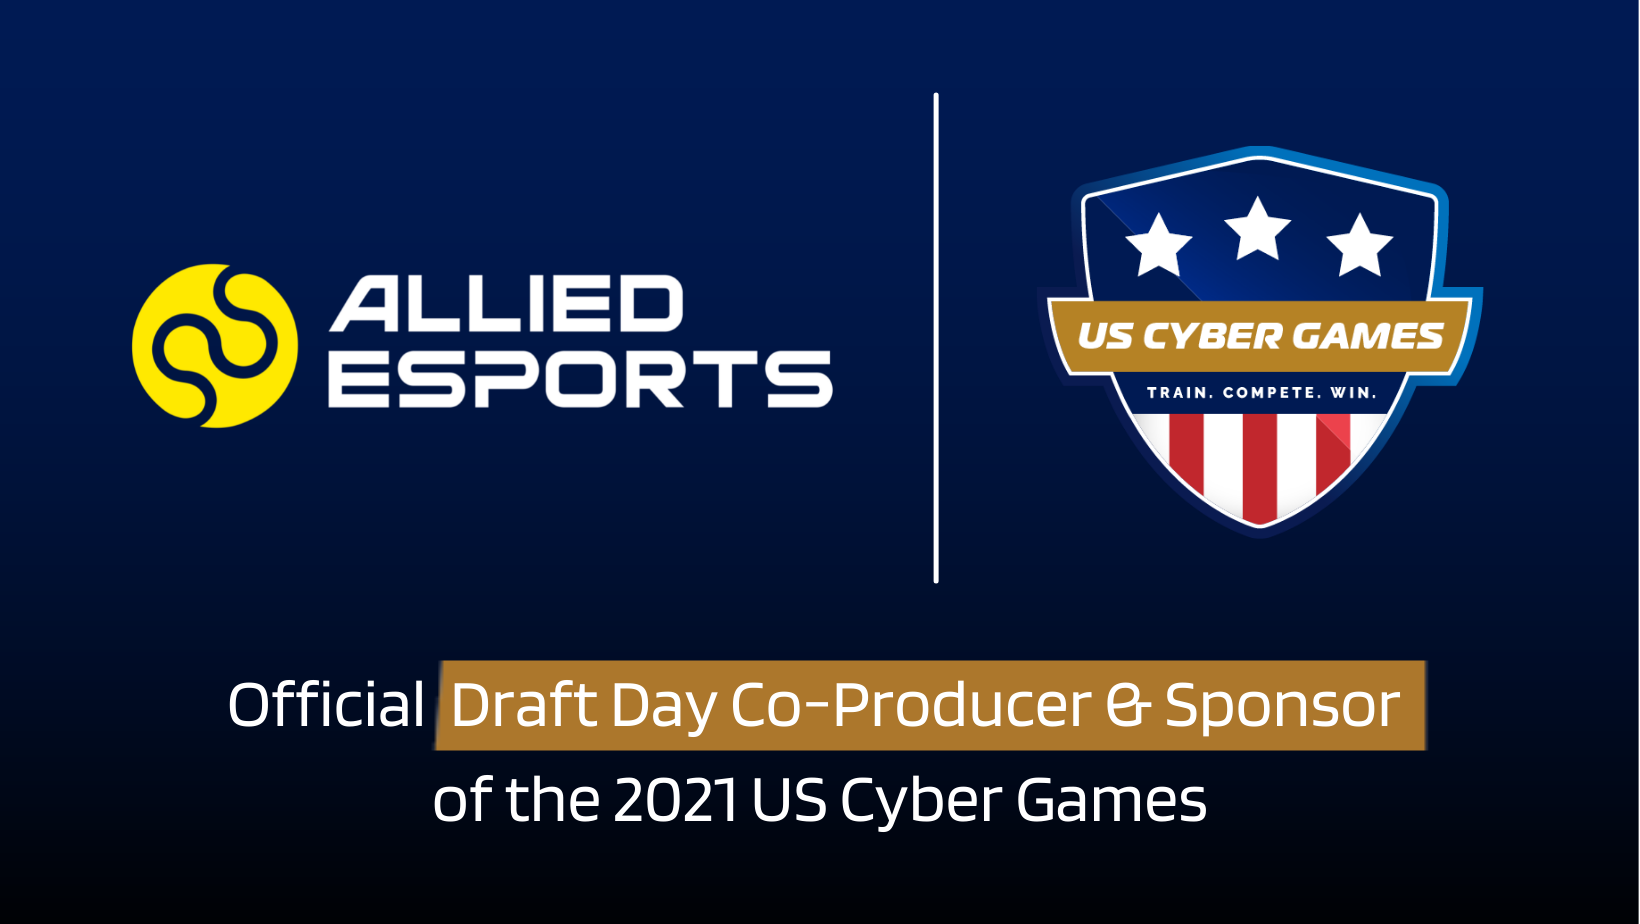 PlayCyber, powered by Katzcy, Taps Allied Esports’ AE Studios to Produce First US Cyber Games™ Draft Day October 5